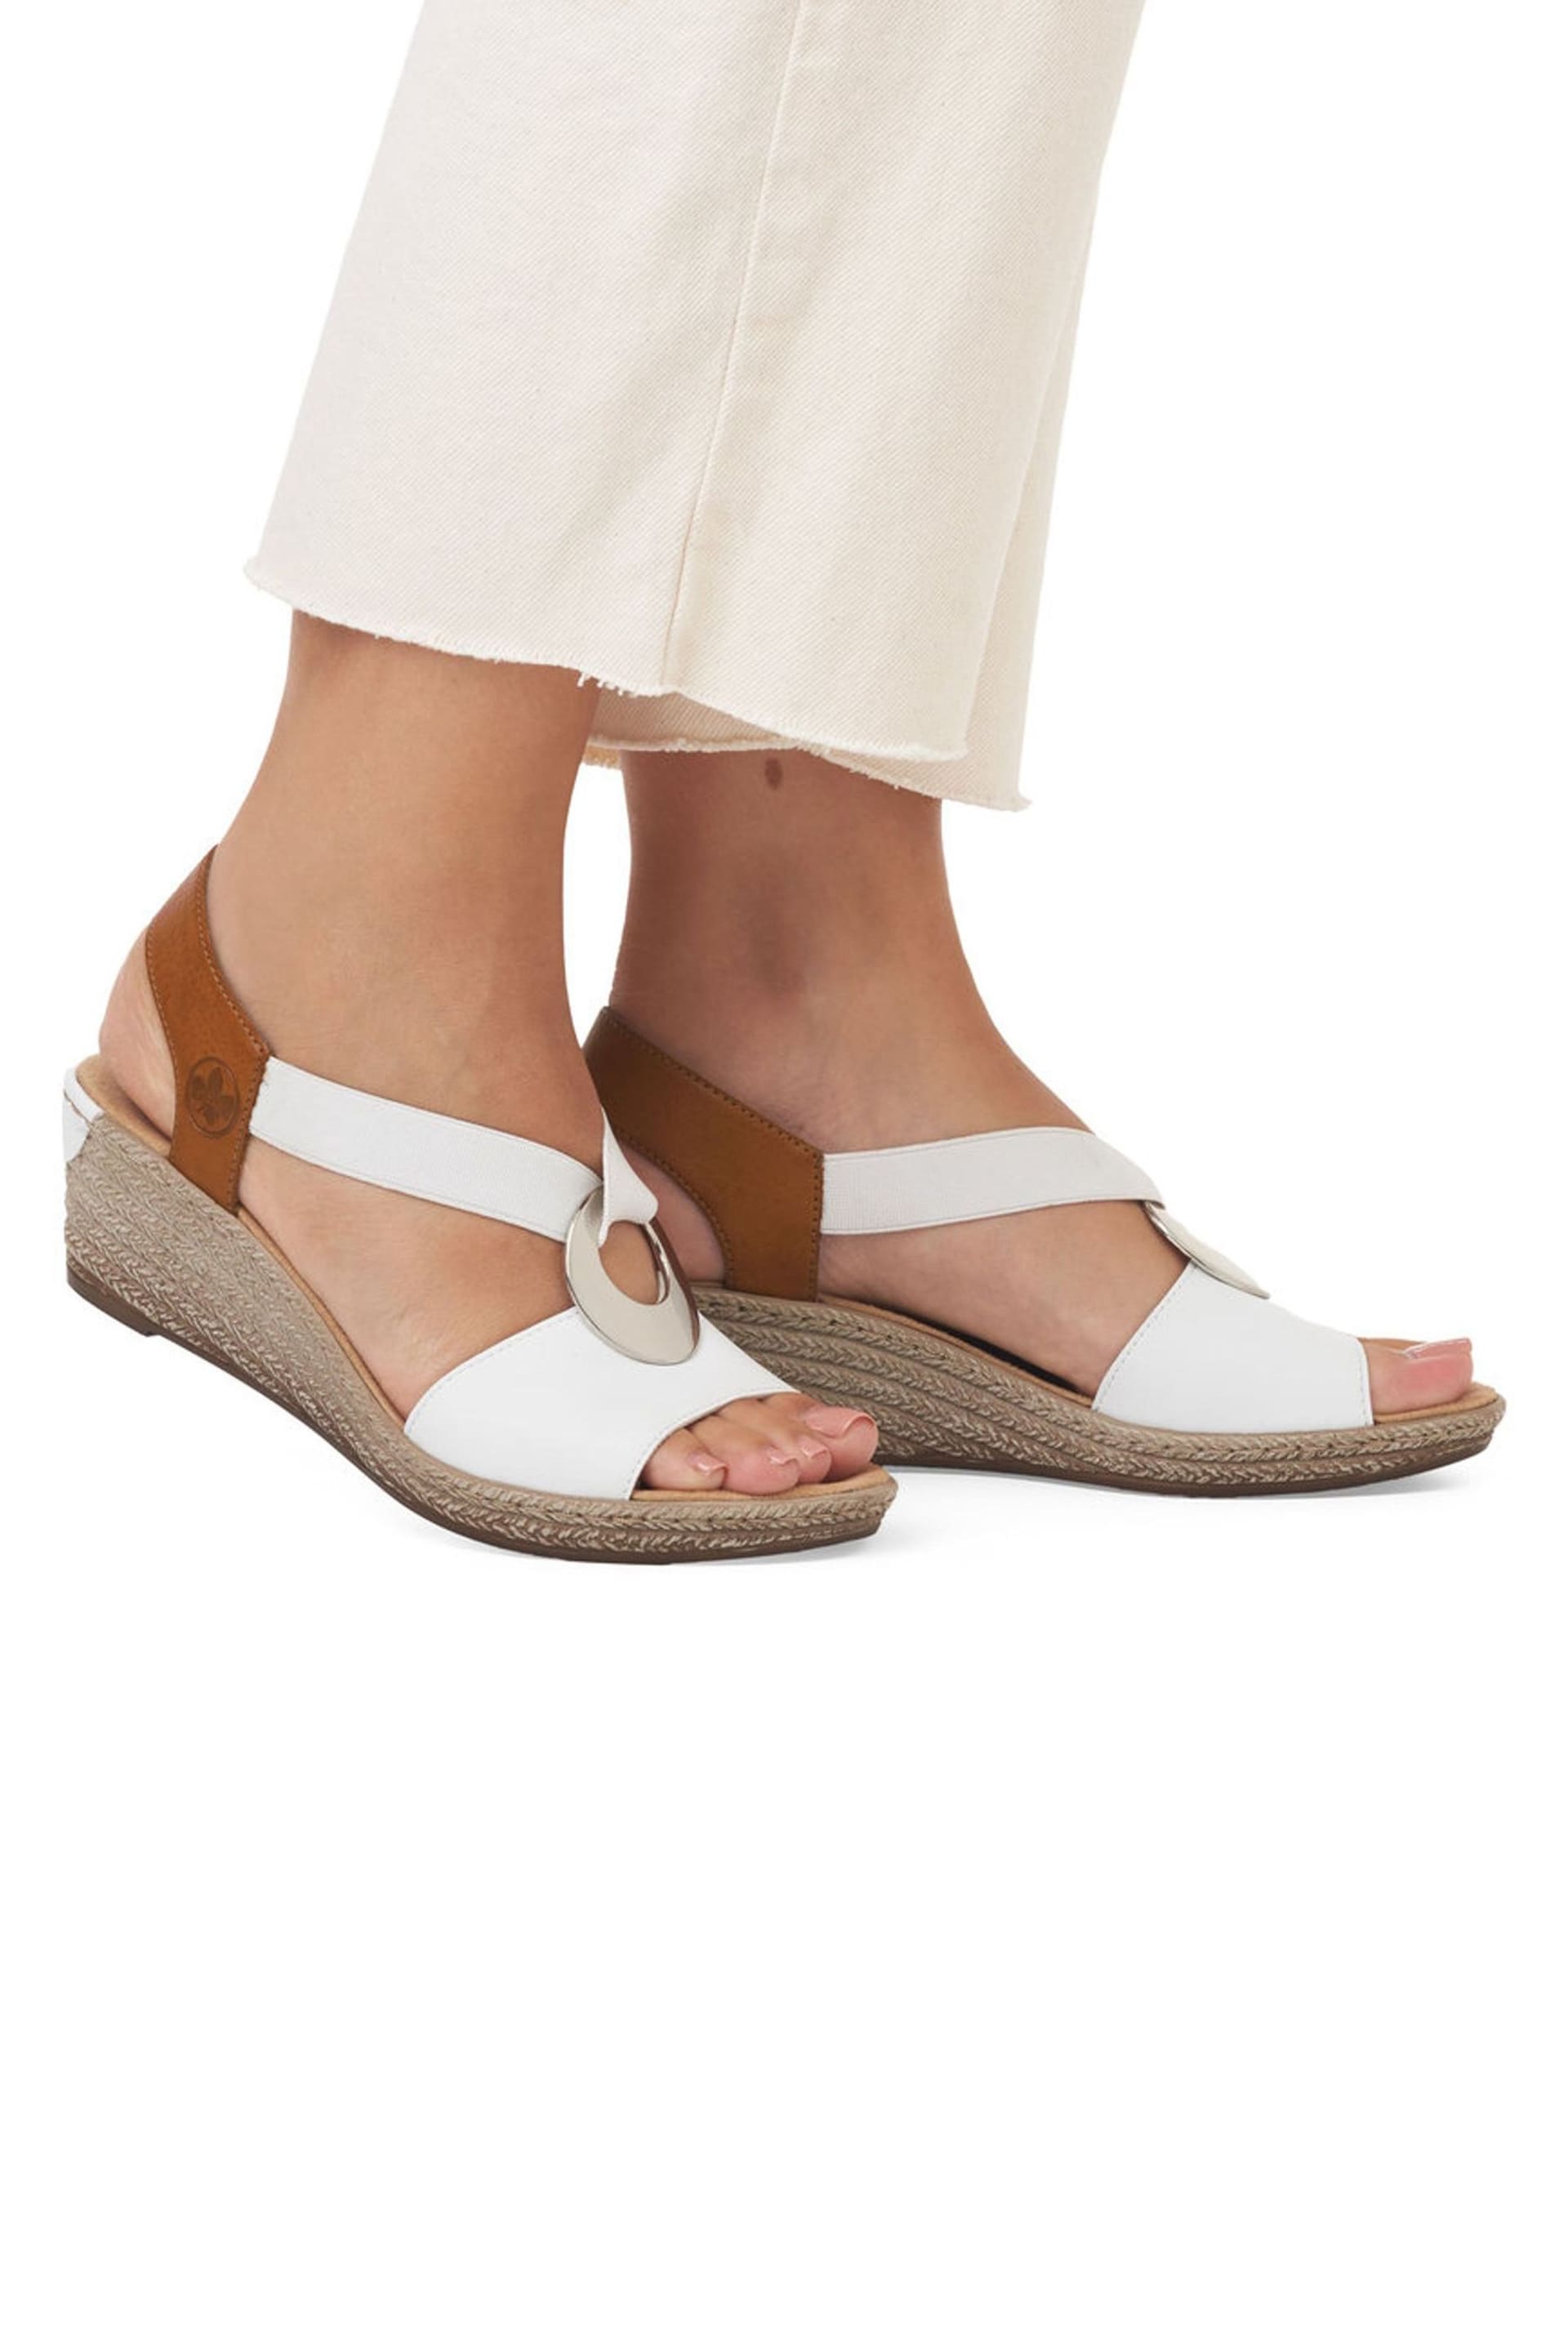 Rieker Womens Elastic Stretch Sandals - Image 10 of 10